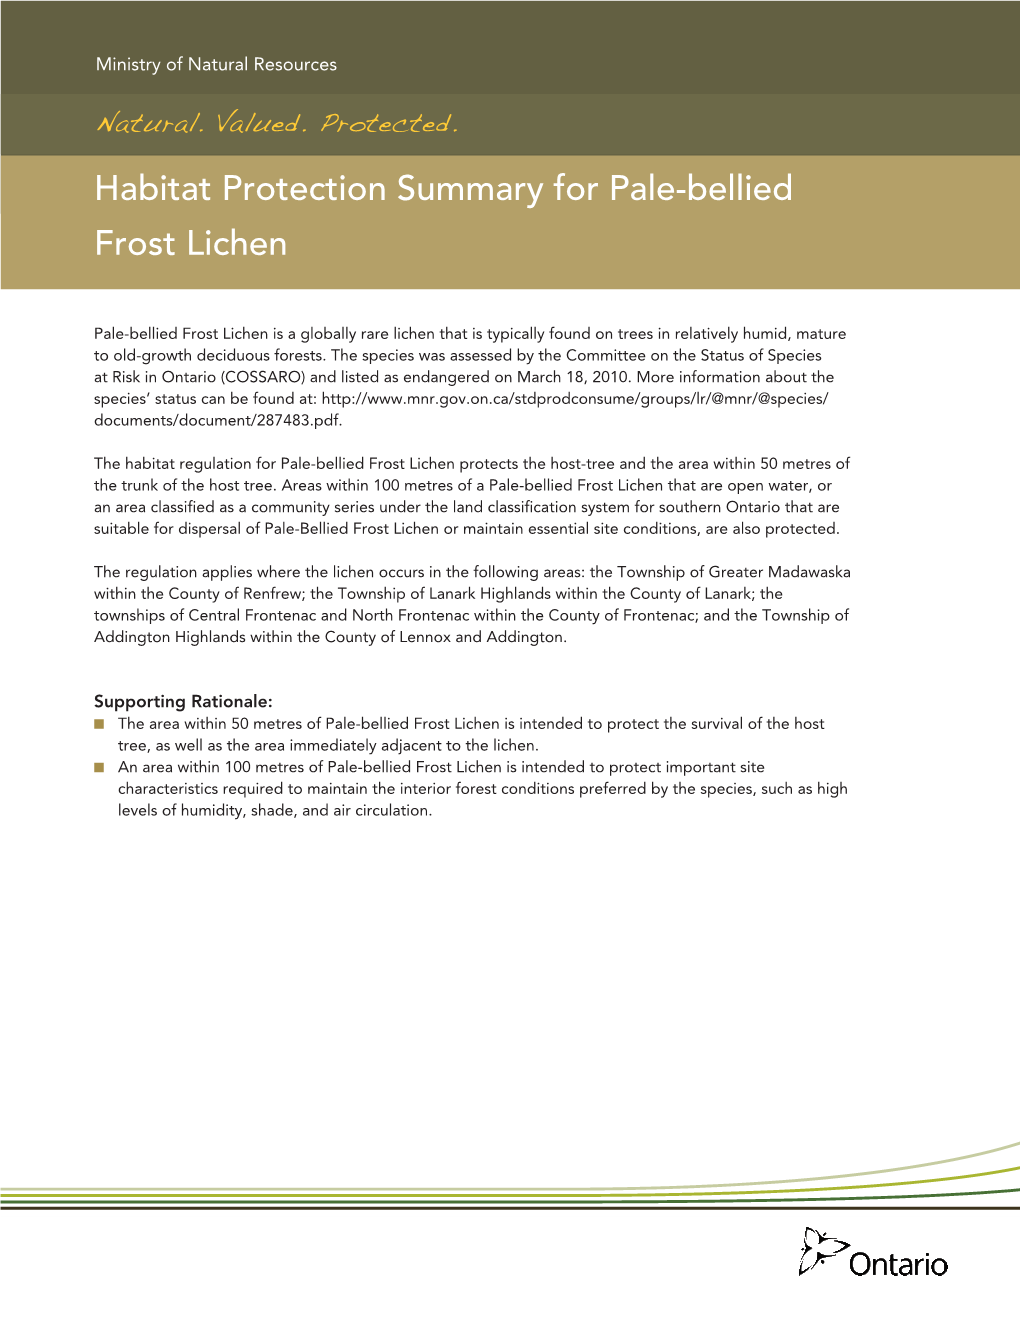 Habitat Protection Summary for Pale-Bellied Frost Lichen